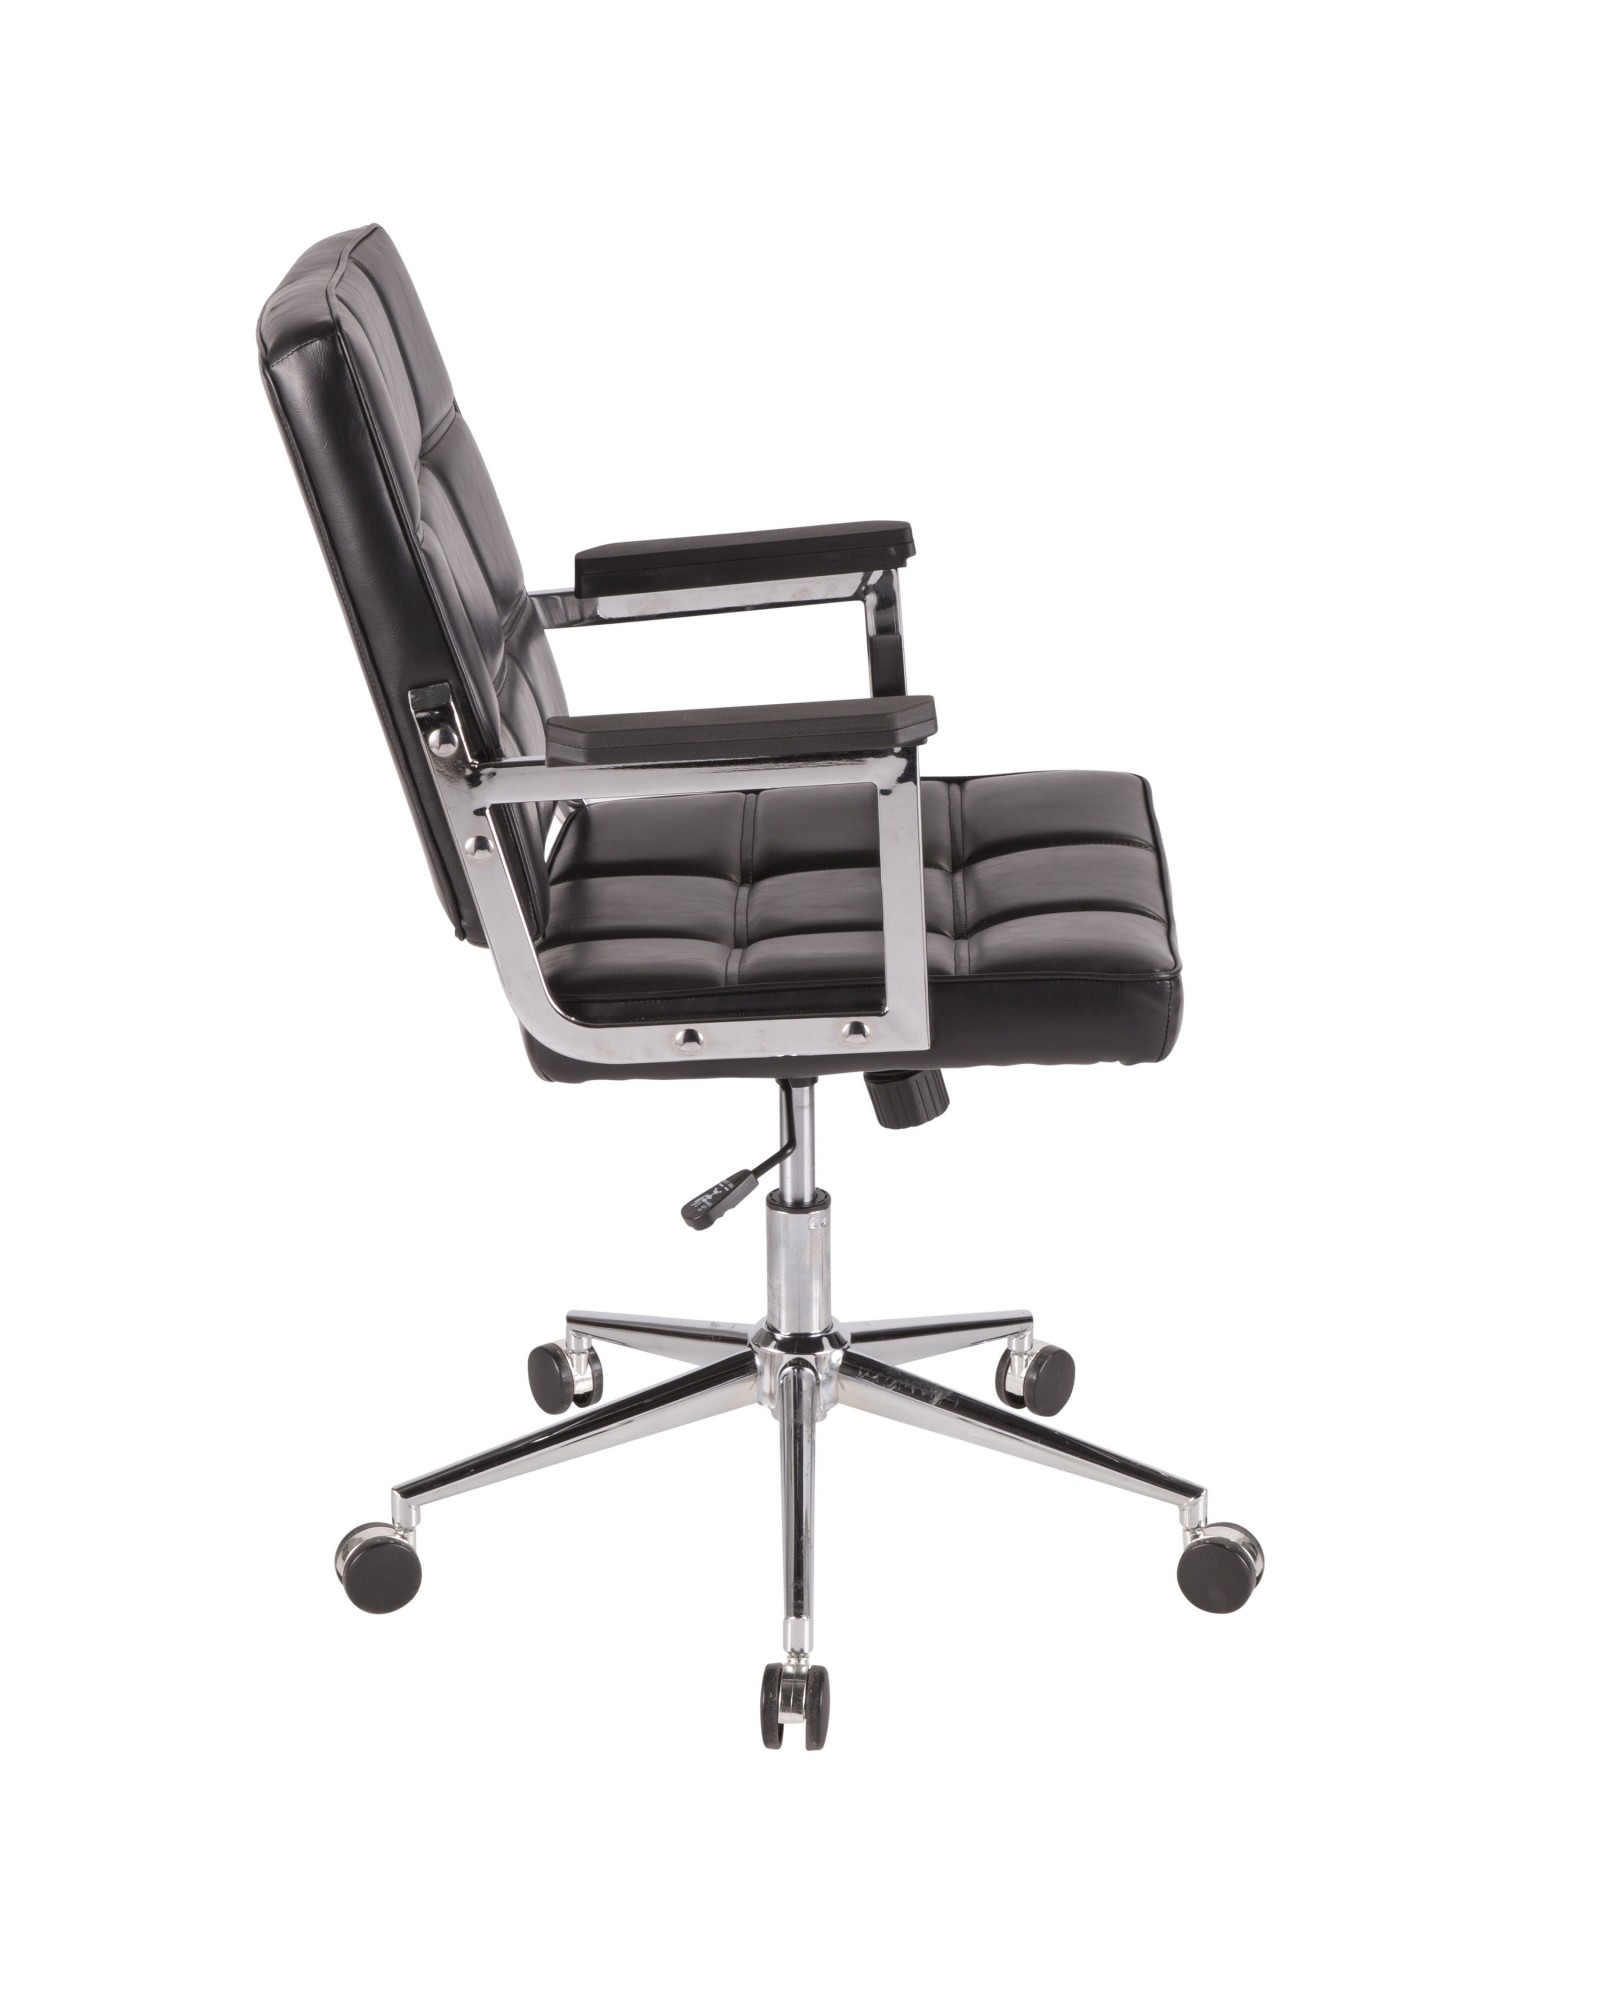 Bureau Contemporary Office Chair with Chrome Metal and Black Faux Leather